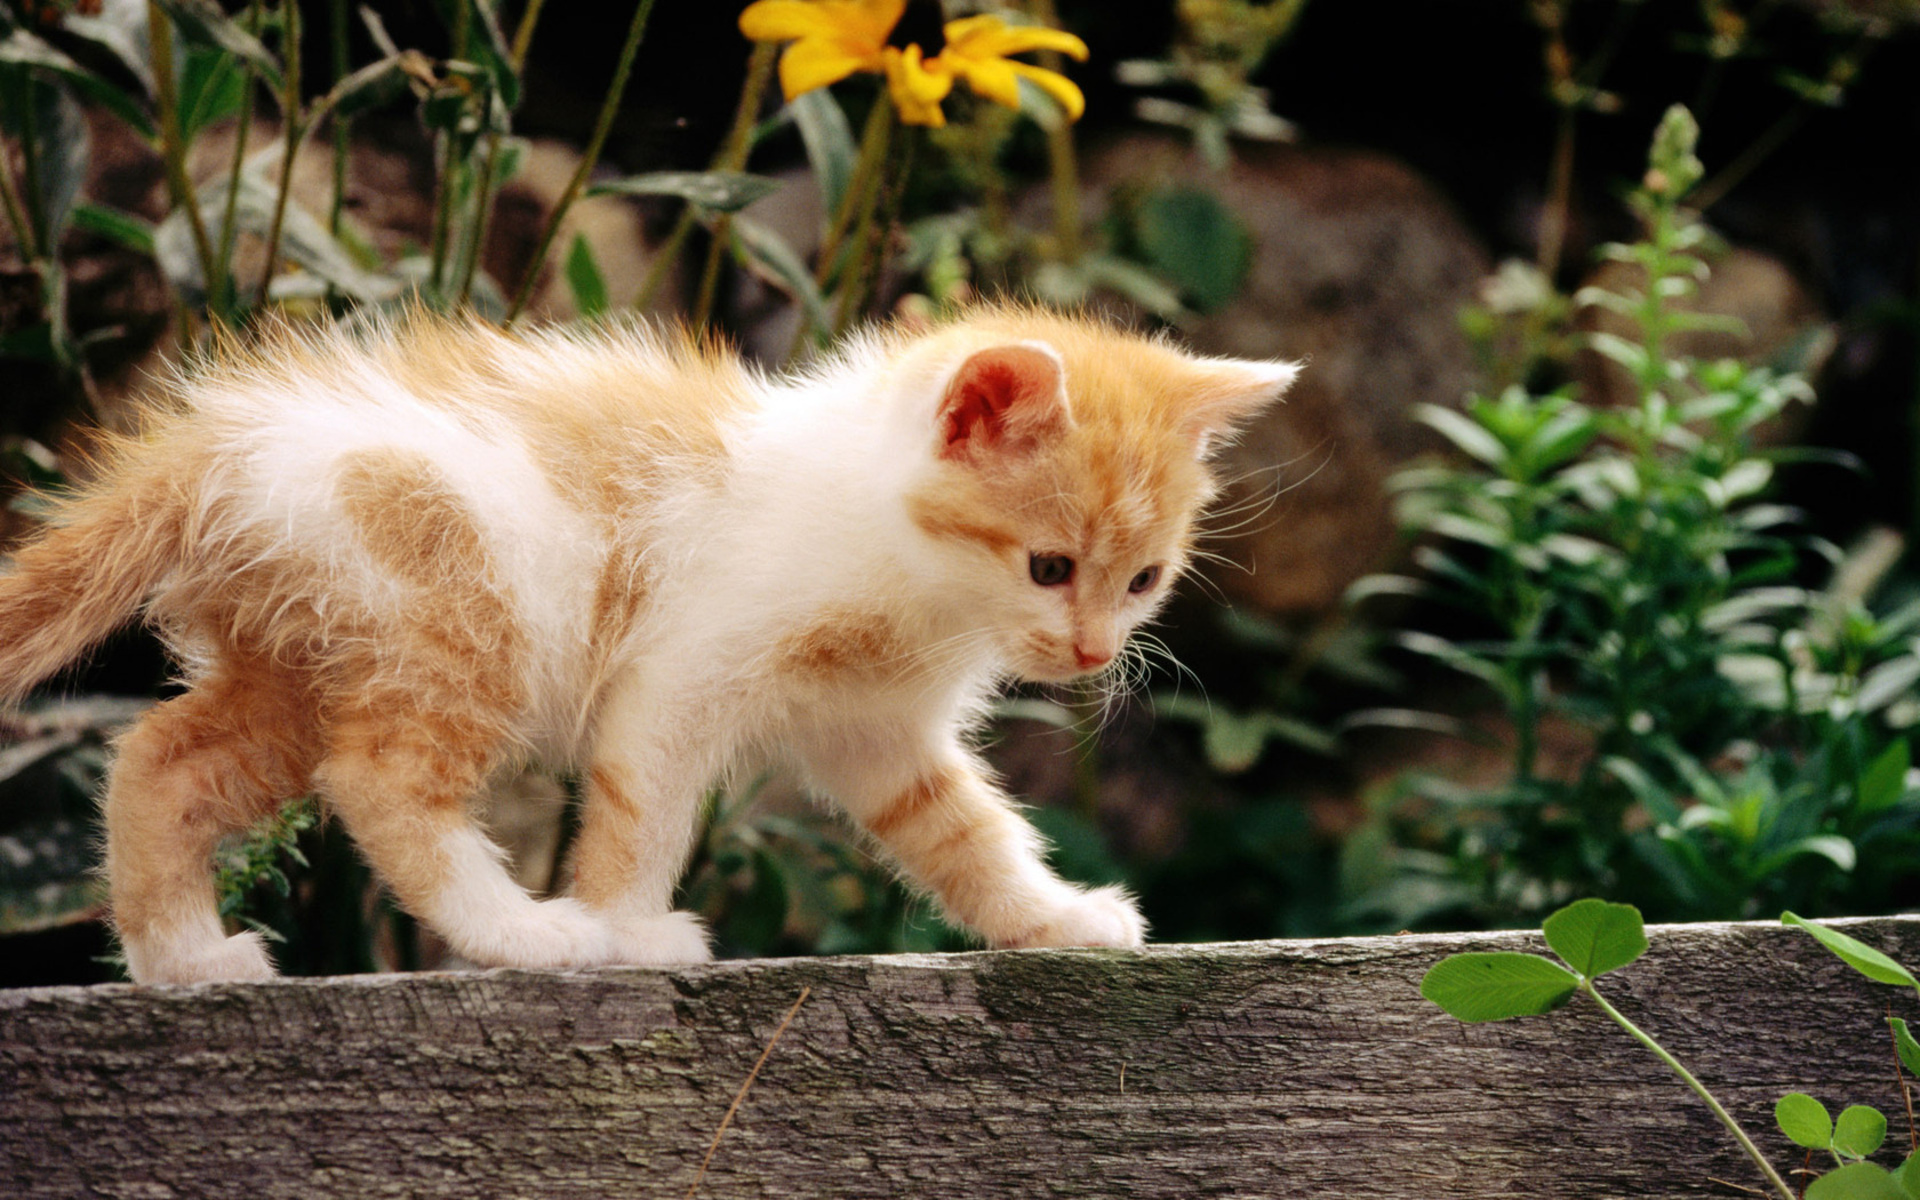 animals, Cats, Felines, Kittens, Fur, Whiskers, Face, Eyes, Paws, Plants, Garden, Wood, Flowers, Babies, Cute Wallpaper